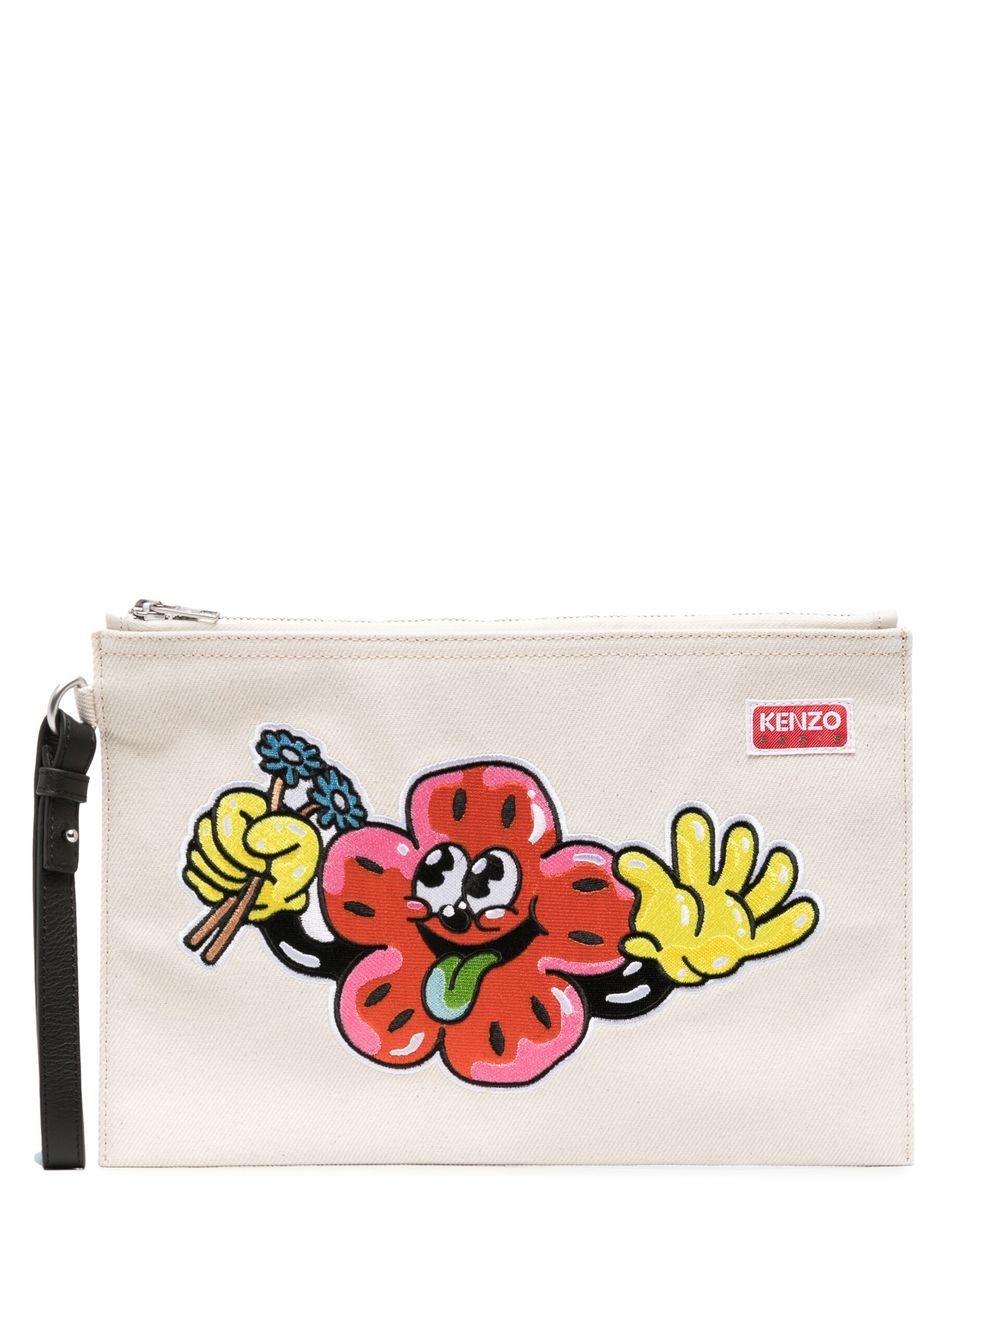 Image 1 of Kenzo motif-embroidered clutch bag